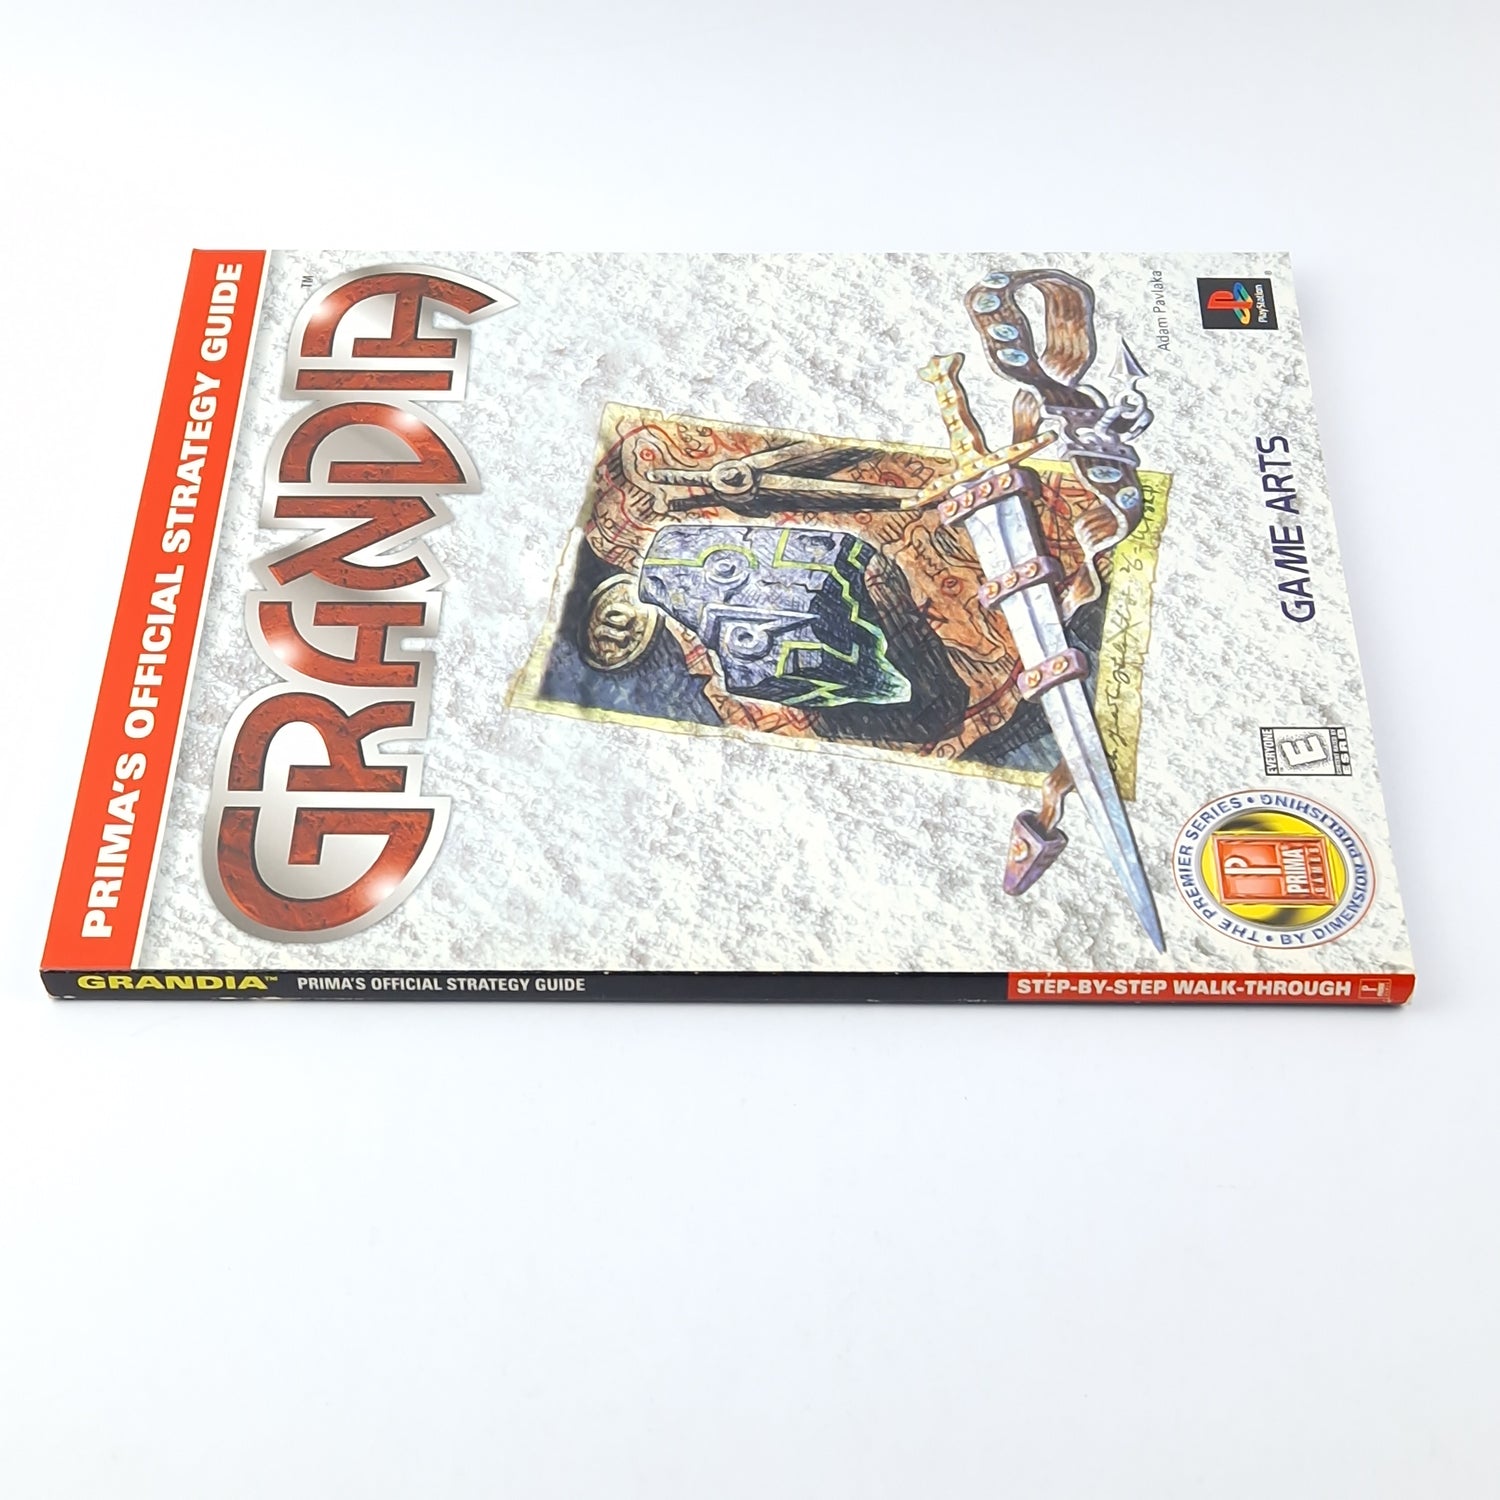 Playstation 1 Spiel : Grandia + Strategy Guide - OVP PAL / SONY PS1 PsOne